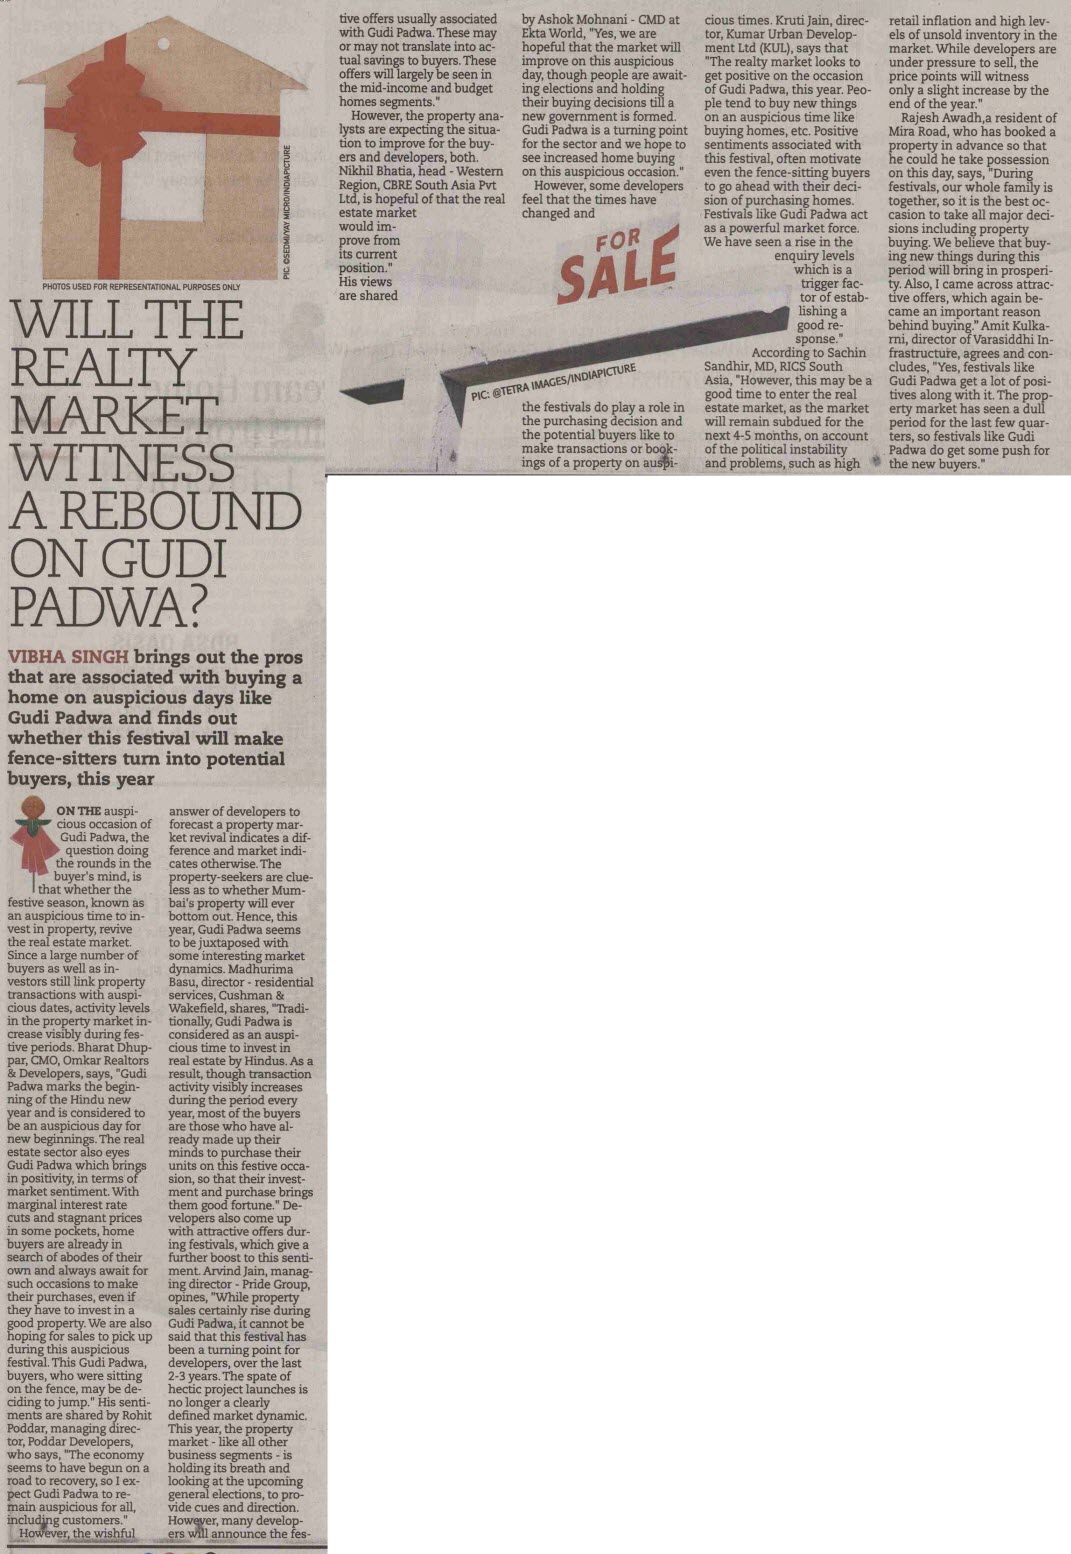 Will the realty market witness a rebound on Gudi Padwa?